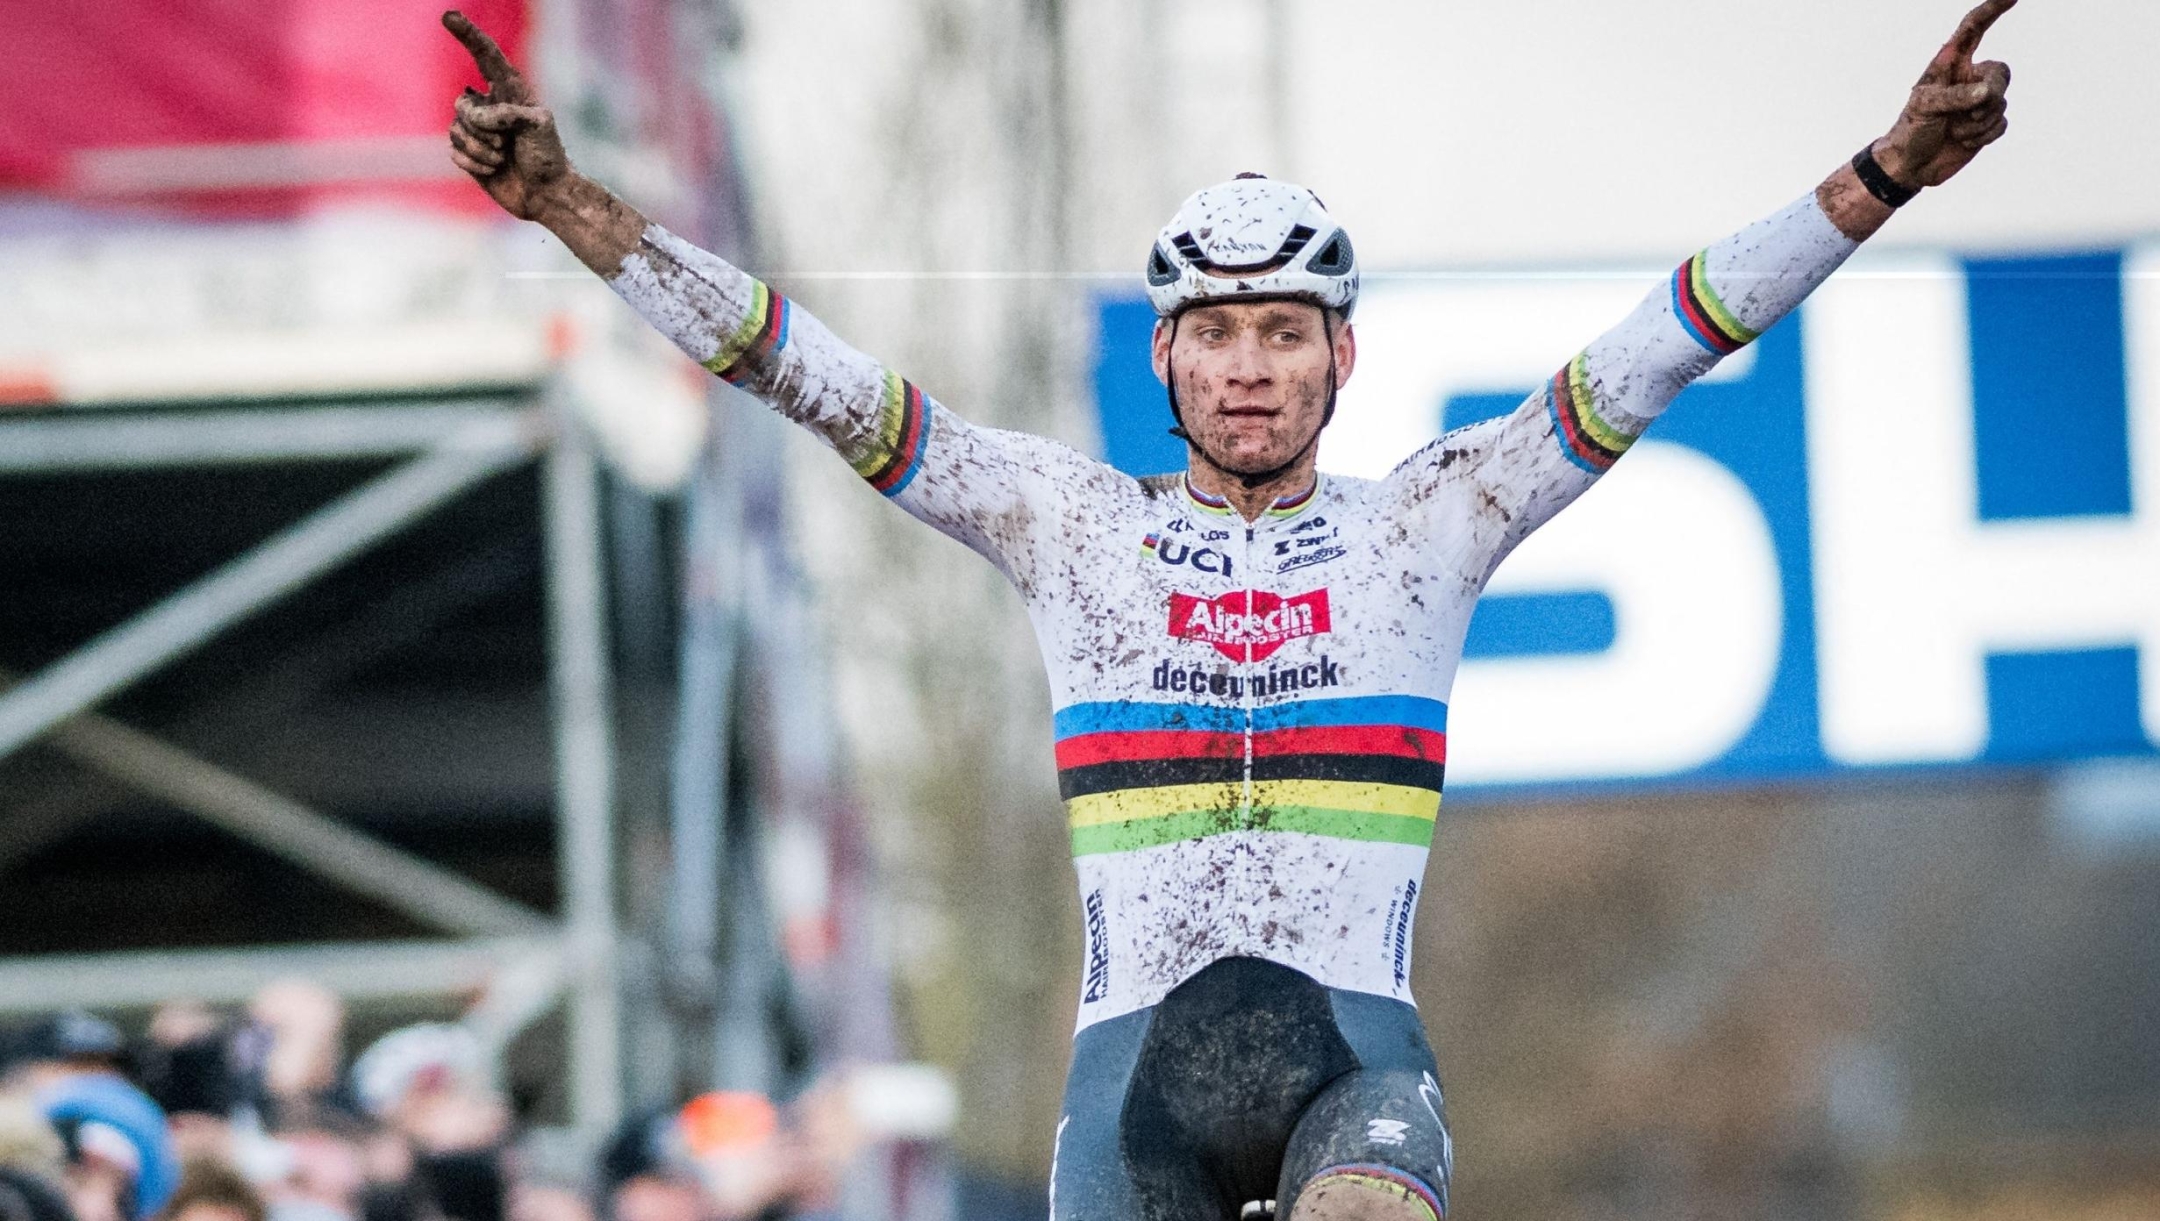 Dutch Mathieu Van Der Poel celebrates as he crosses the finish line to win the men's elite race of the World Cup cyclocross cycling event in Gavere on December 26, 2023, stage 10 (out of 14) of the UCI World Cup competition. (Photo by JASPER JACOBS / Belga / AFP) / Belgium OUT